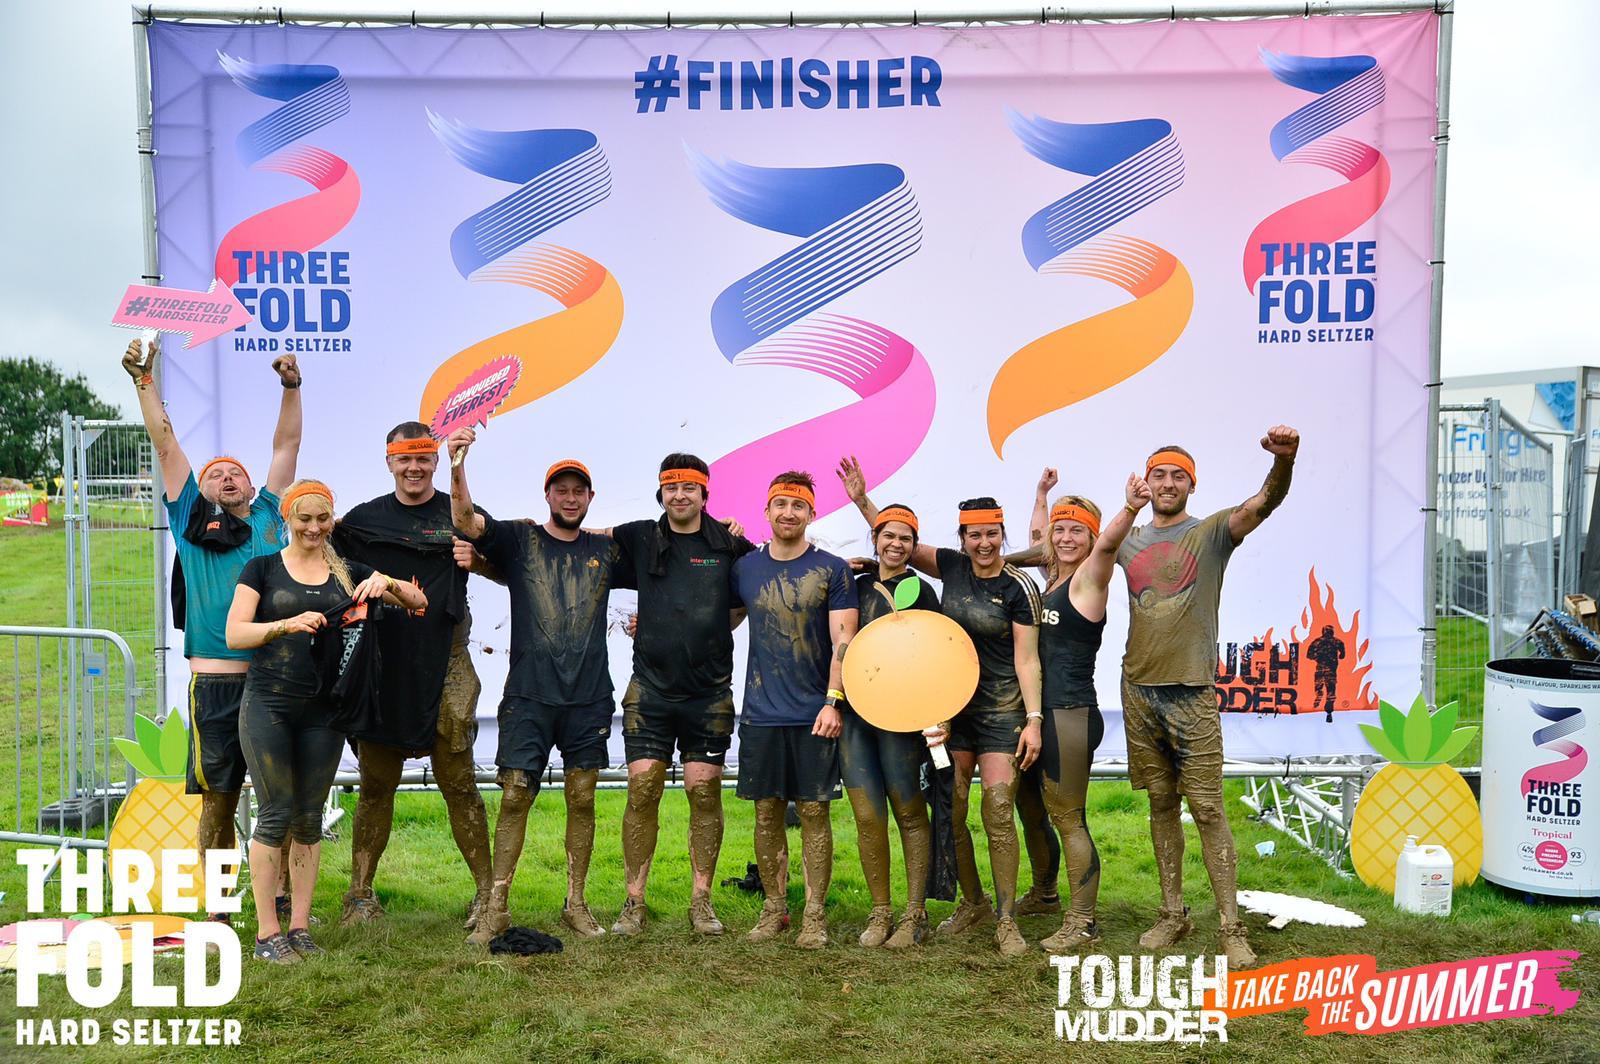 Tough Mudder Proves No Obstacle For Team JZ